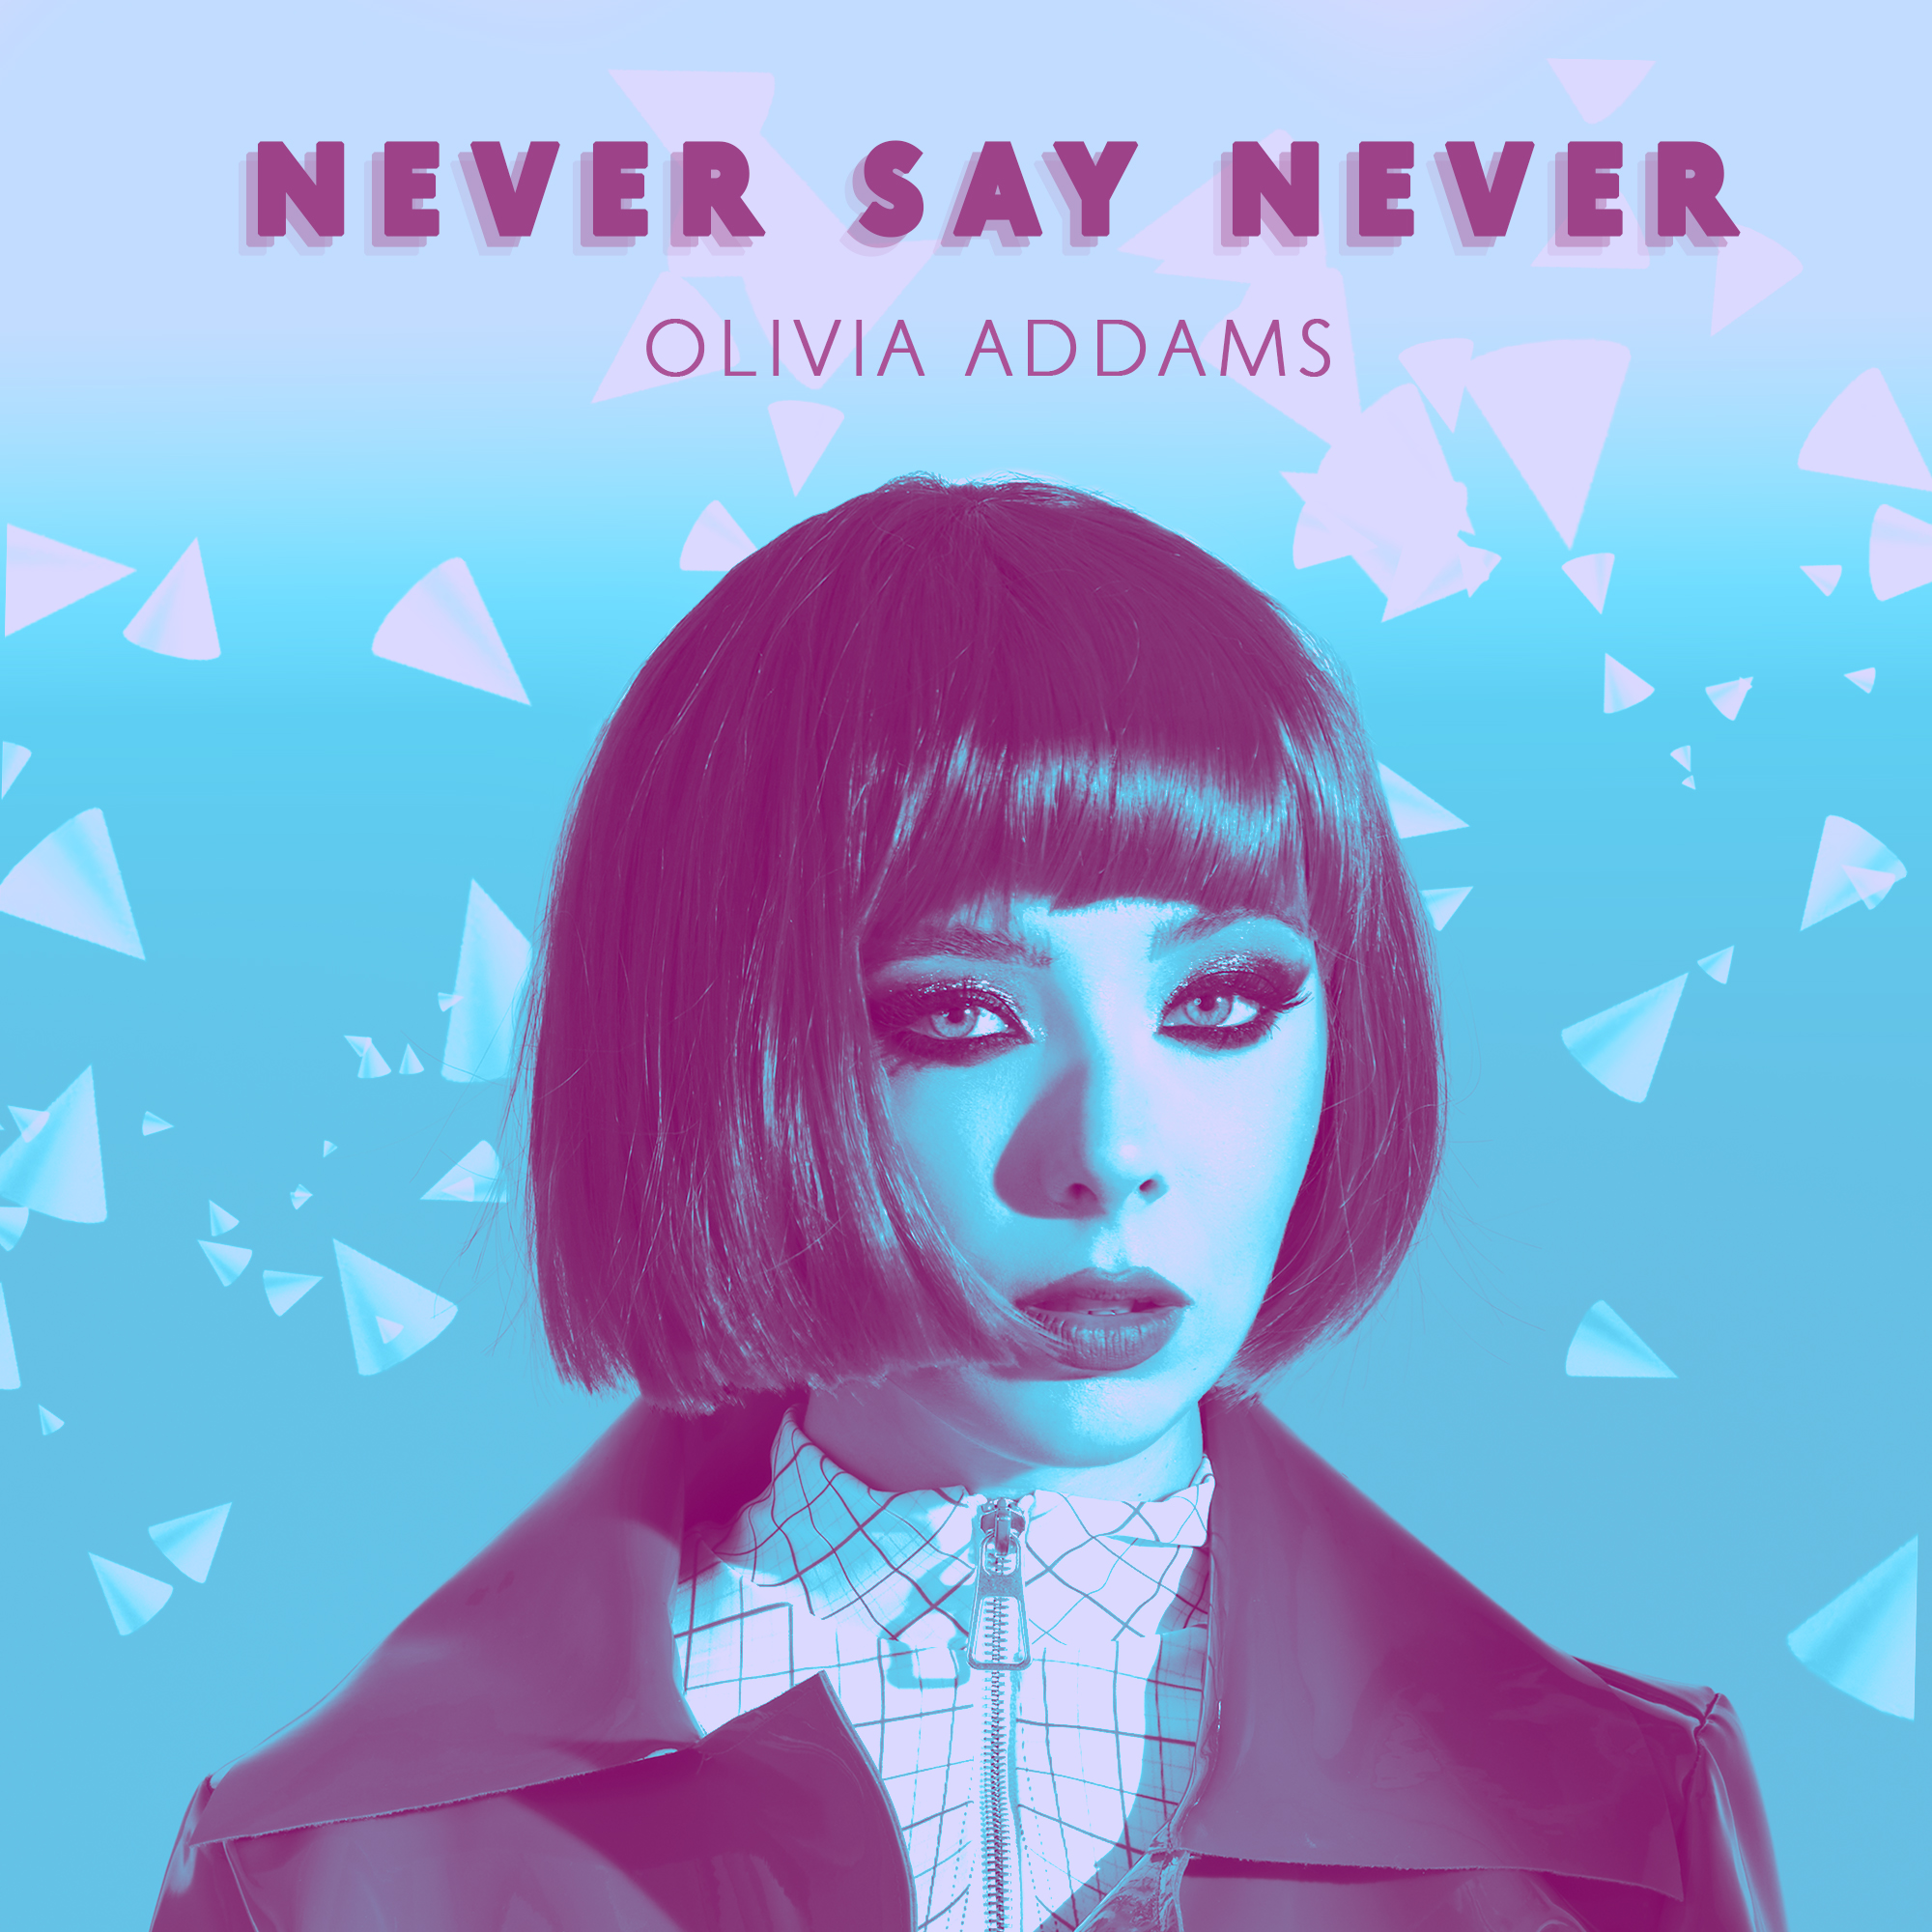 Have a never be the say. Never say never Olivia Addams обложка трека.